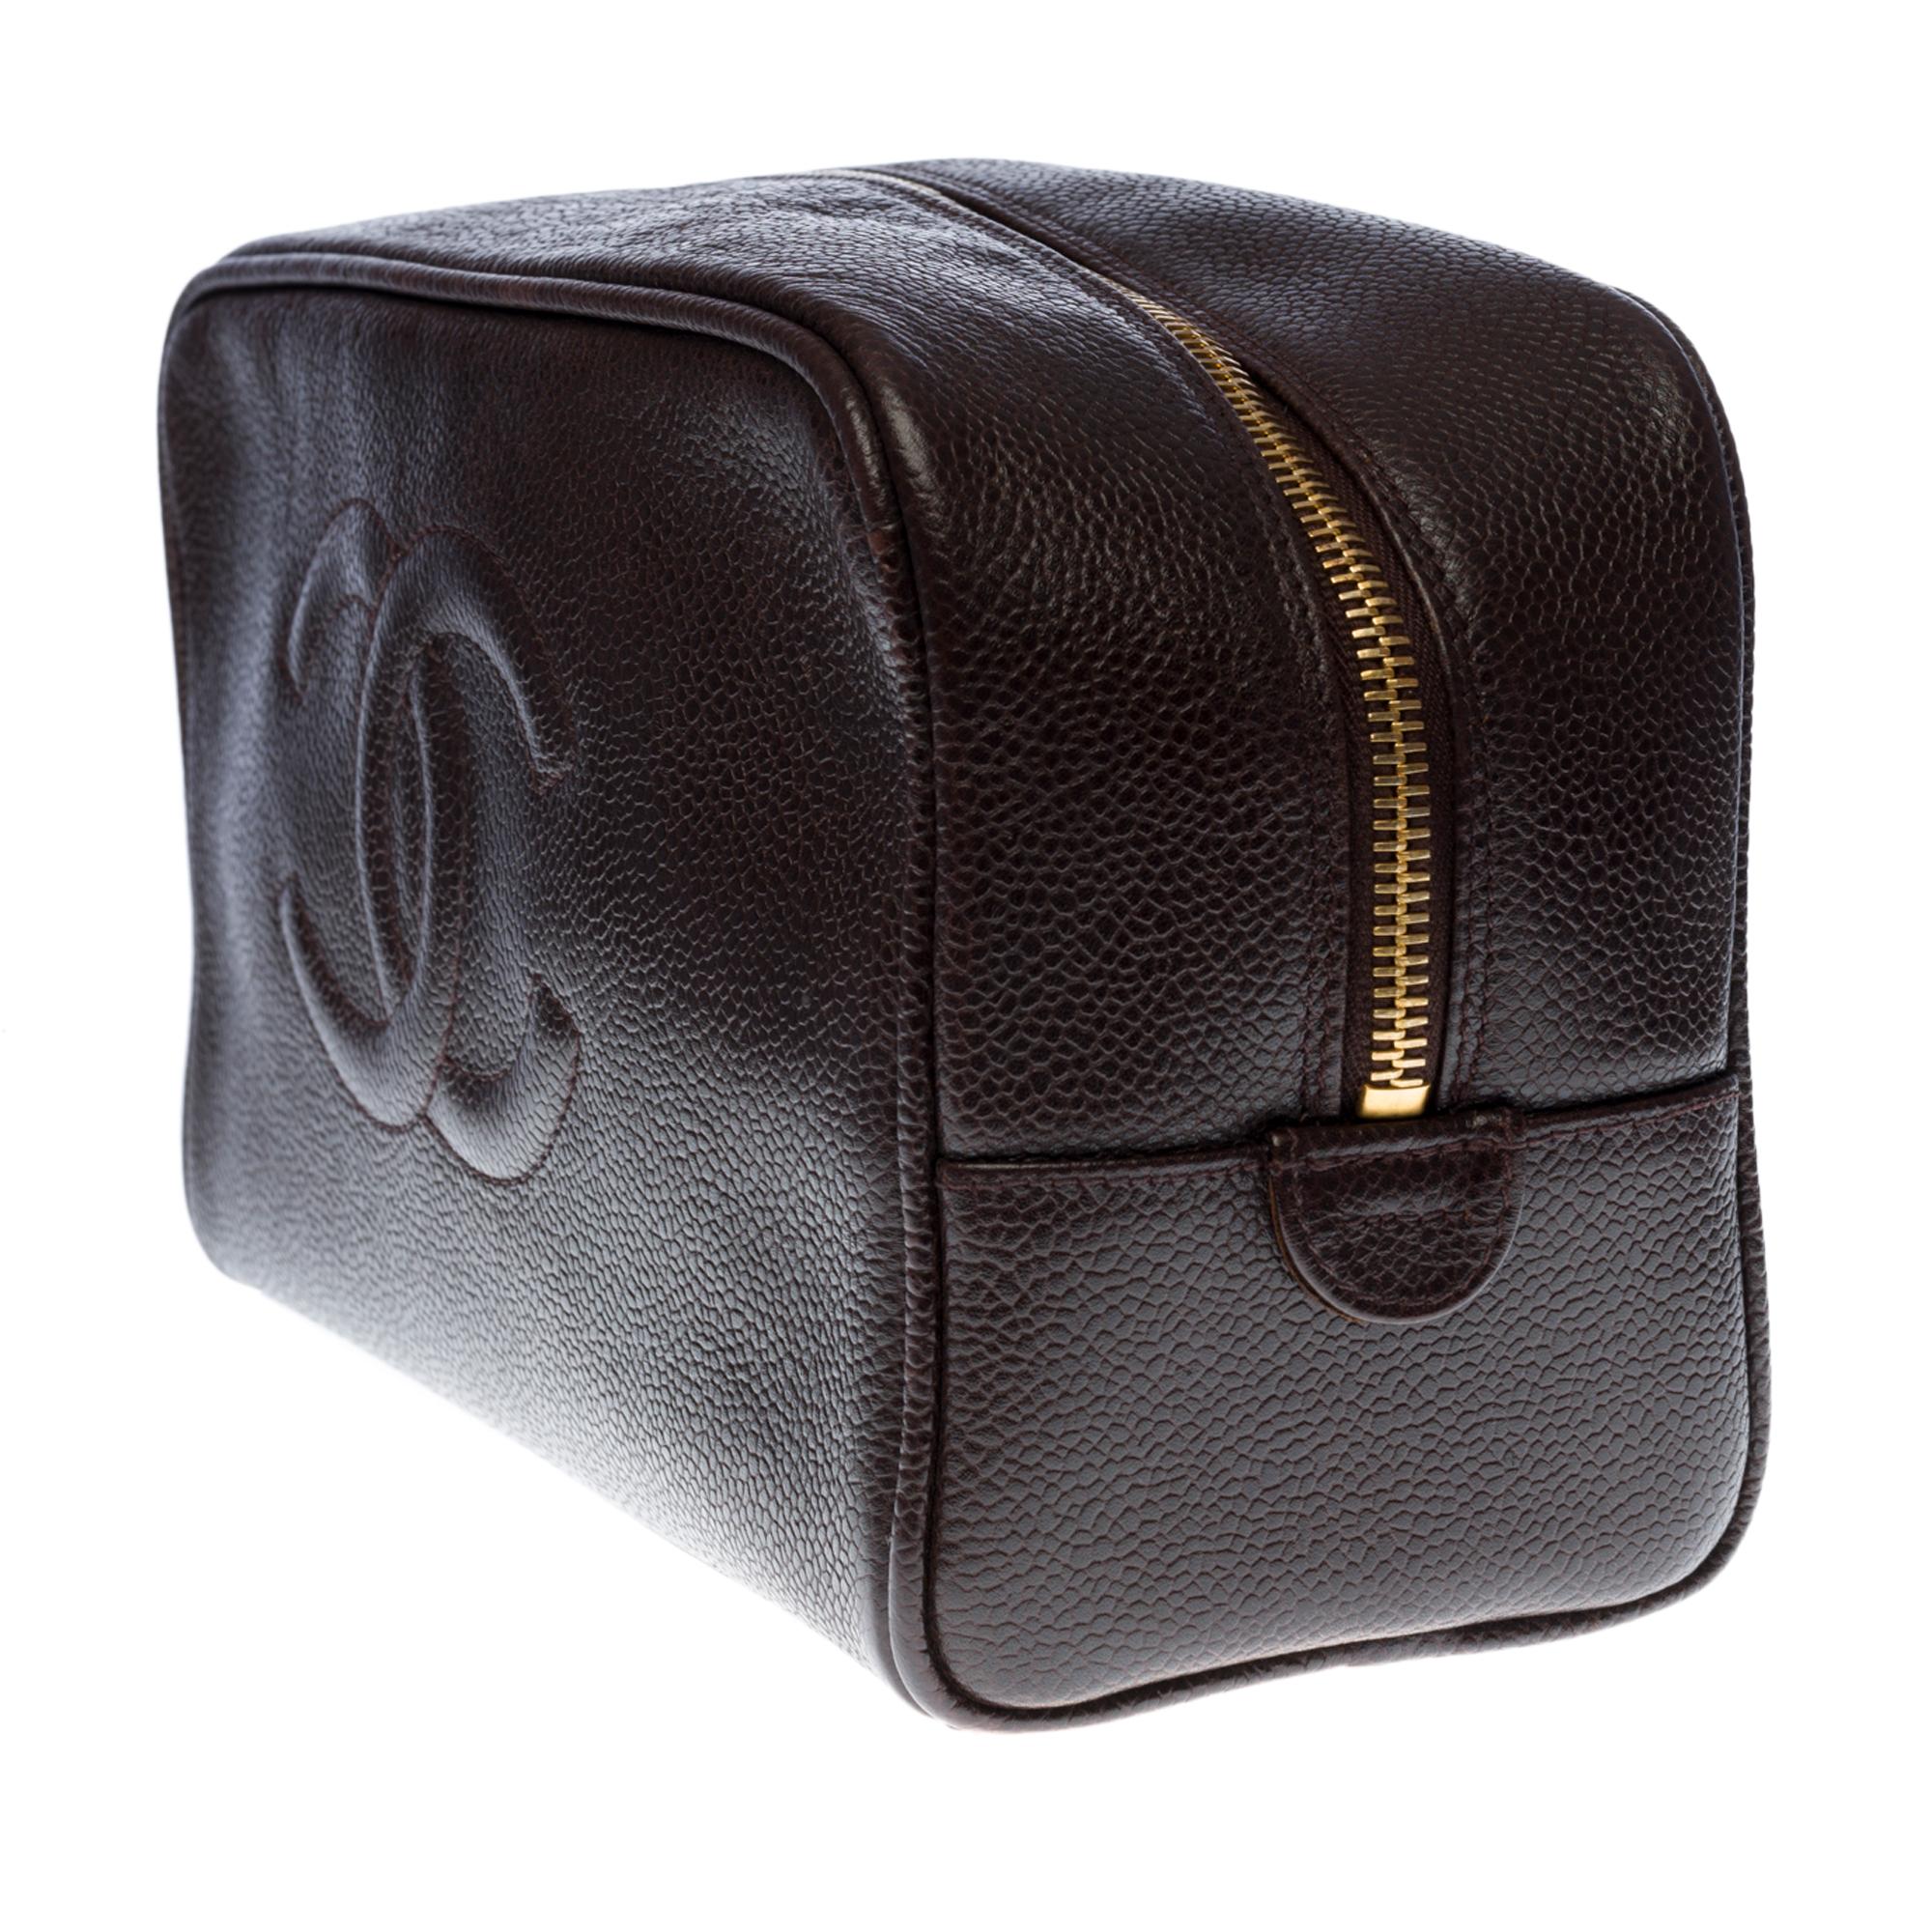 Charming Chanel CC Toilet bag in brown caviar leather In Excellent Condition For Sale In Paris, IDF